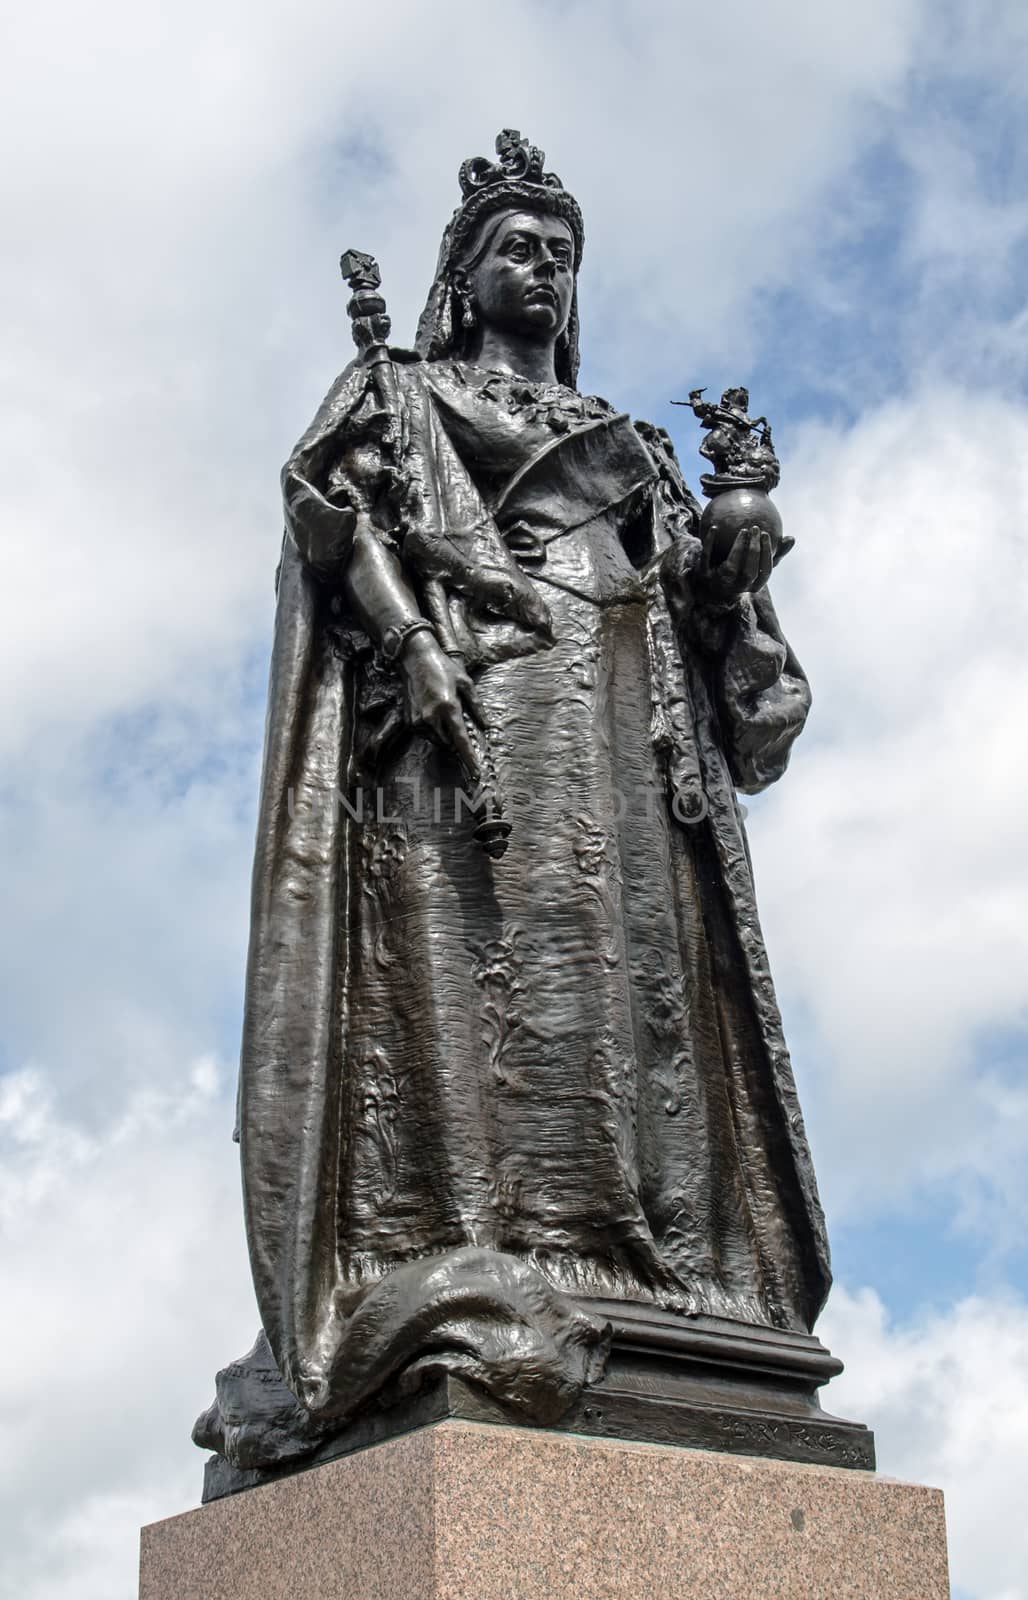 Full length statue of Queen Victoria wearing state robes and carrying an orb and sceptre.  Sculpted by Henry Price in 1904 and on public display at Sandhurst Military Academy in Berkshire.